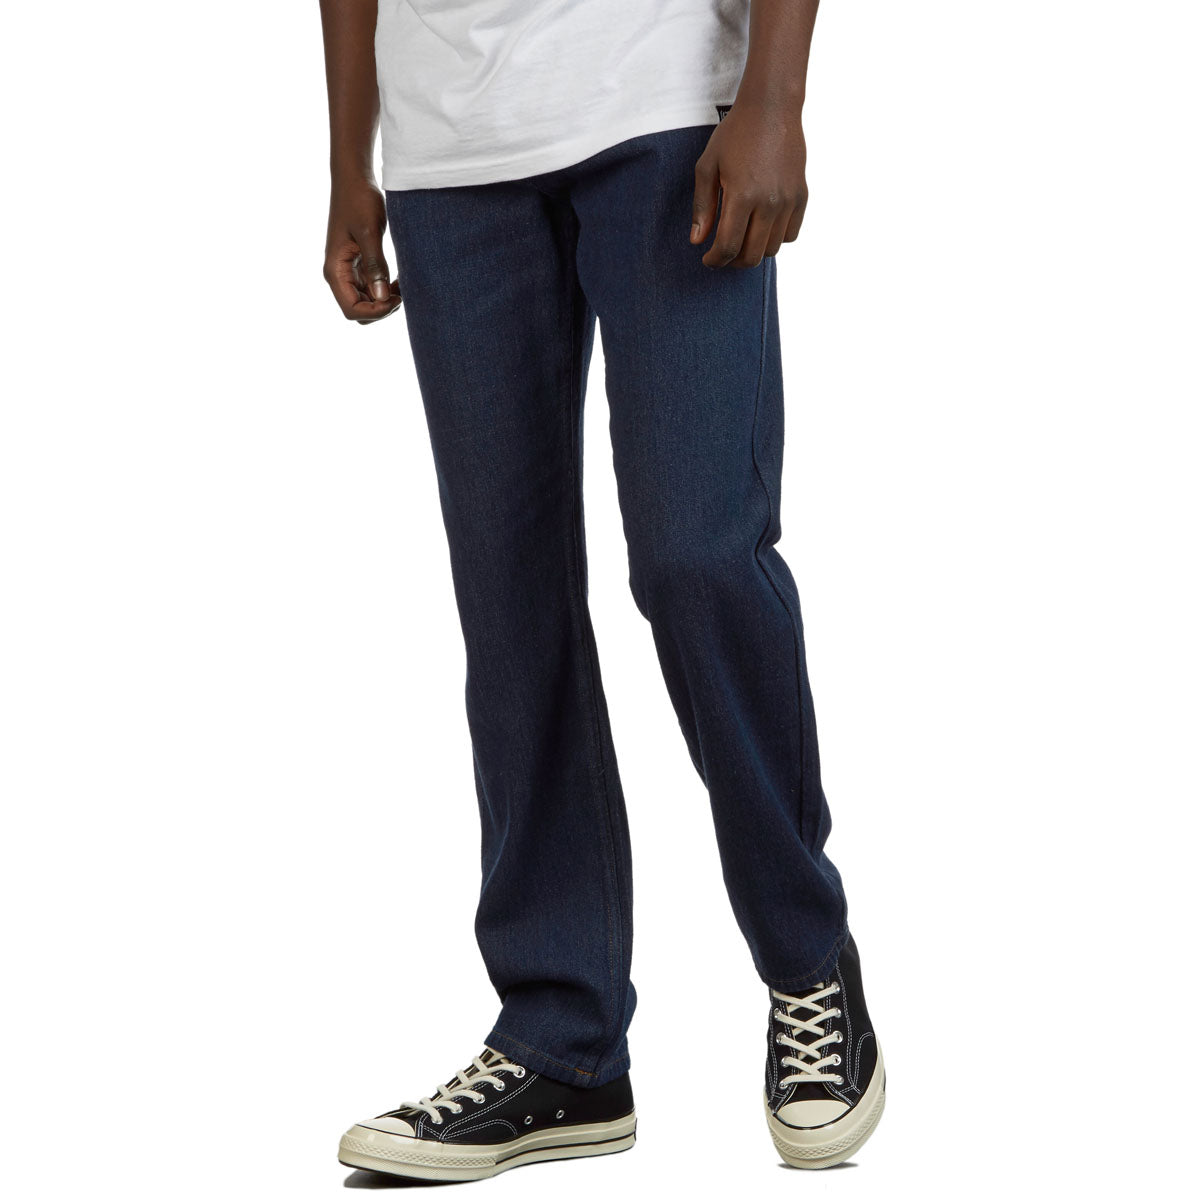 CCS Standard Plus Relaxed Denim Jeans - Raw image 1